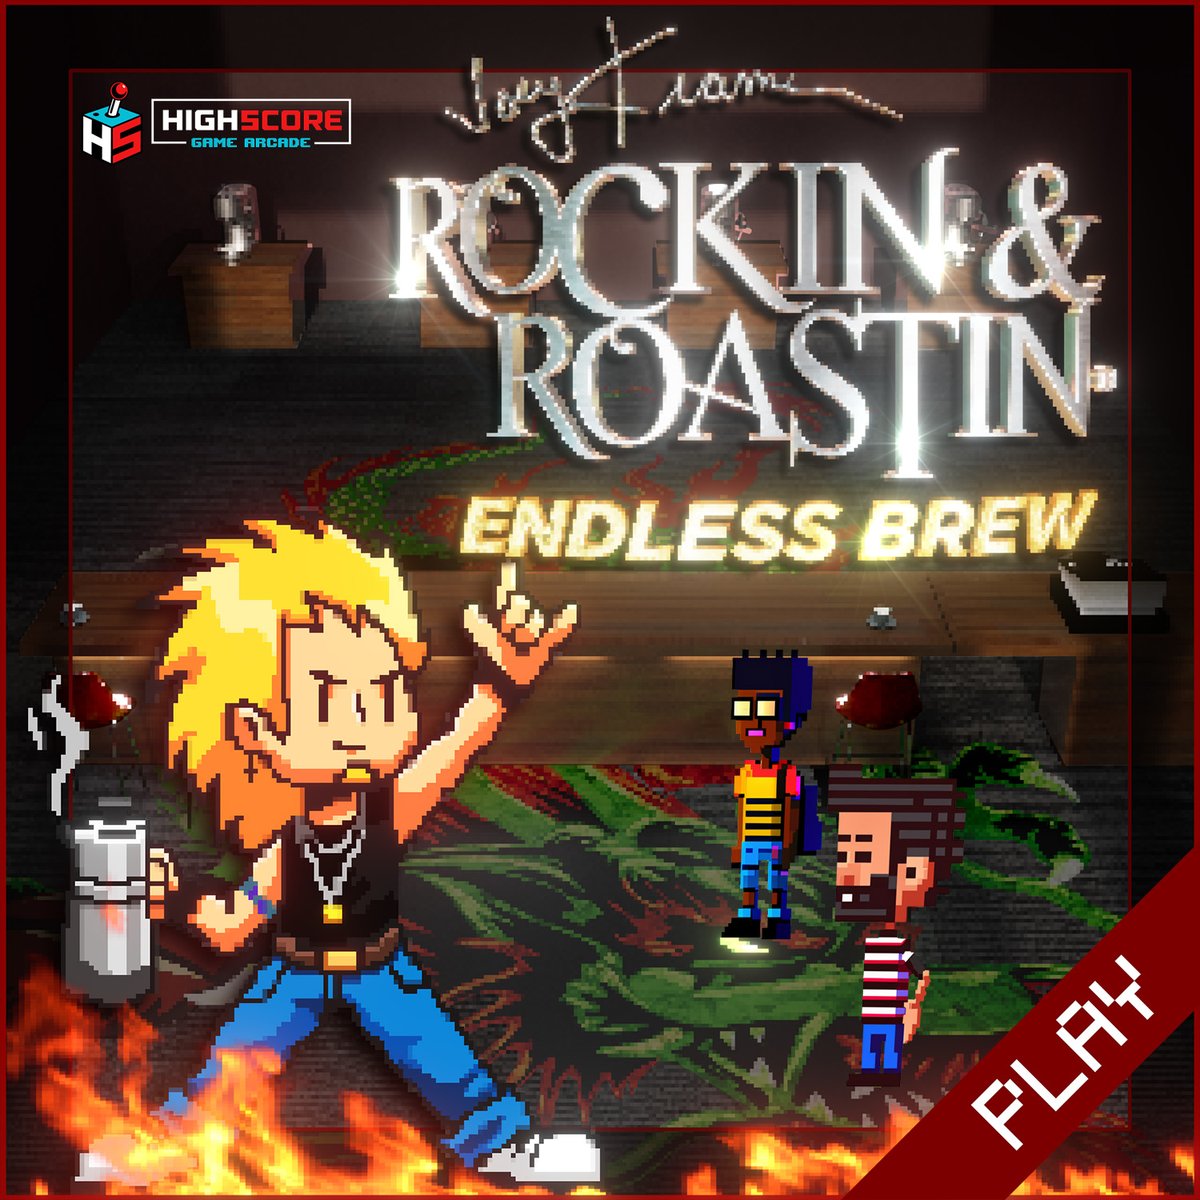 I have been working on an arcade-style game inspired by the old Tapper arcade game. It is a coffee shop game based on the coffee brand Rockin and Roastin, which was created by Joey Kramer of Aerosmith. You can play it now at highscoregamearcade.com